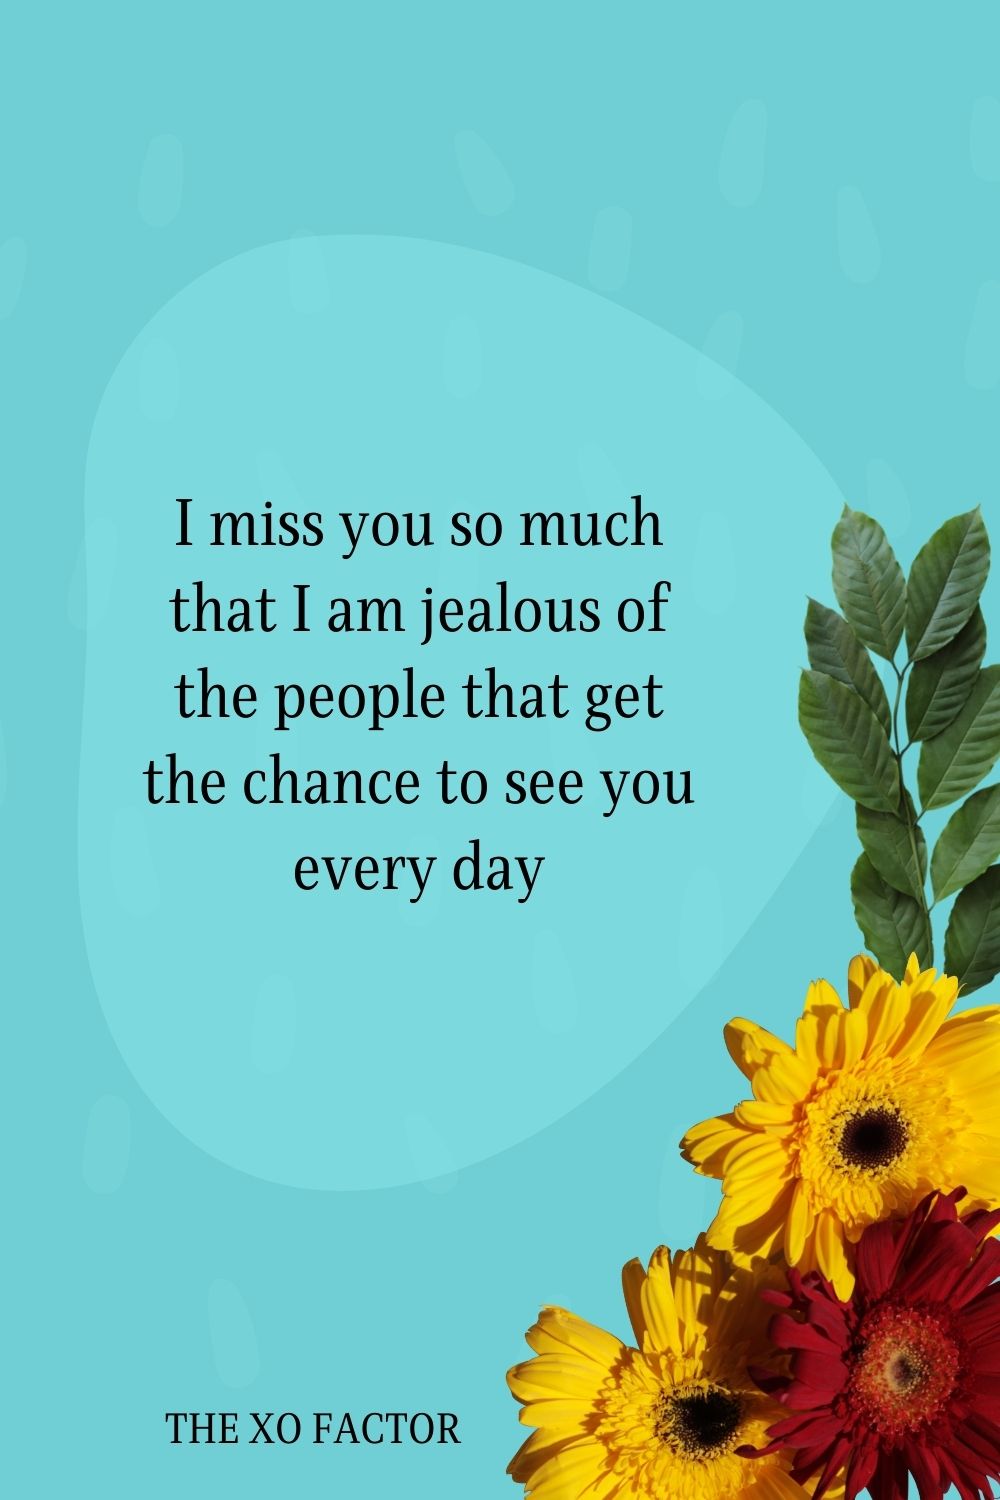 I miss you so much that I am jealous of the people that get the chance to see you every day